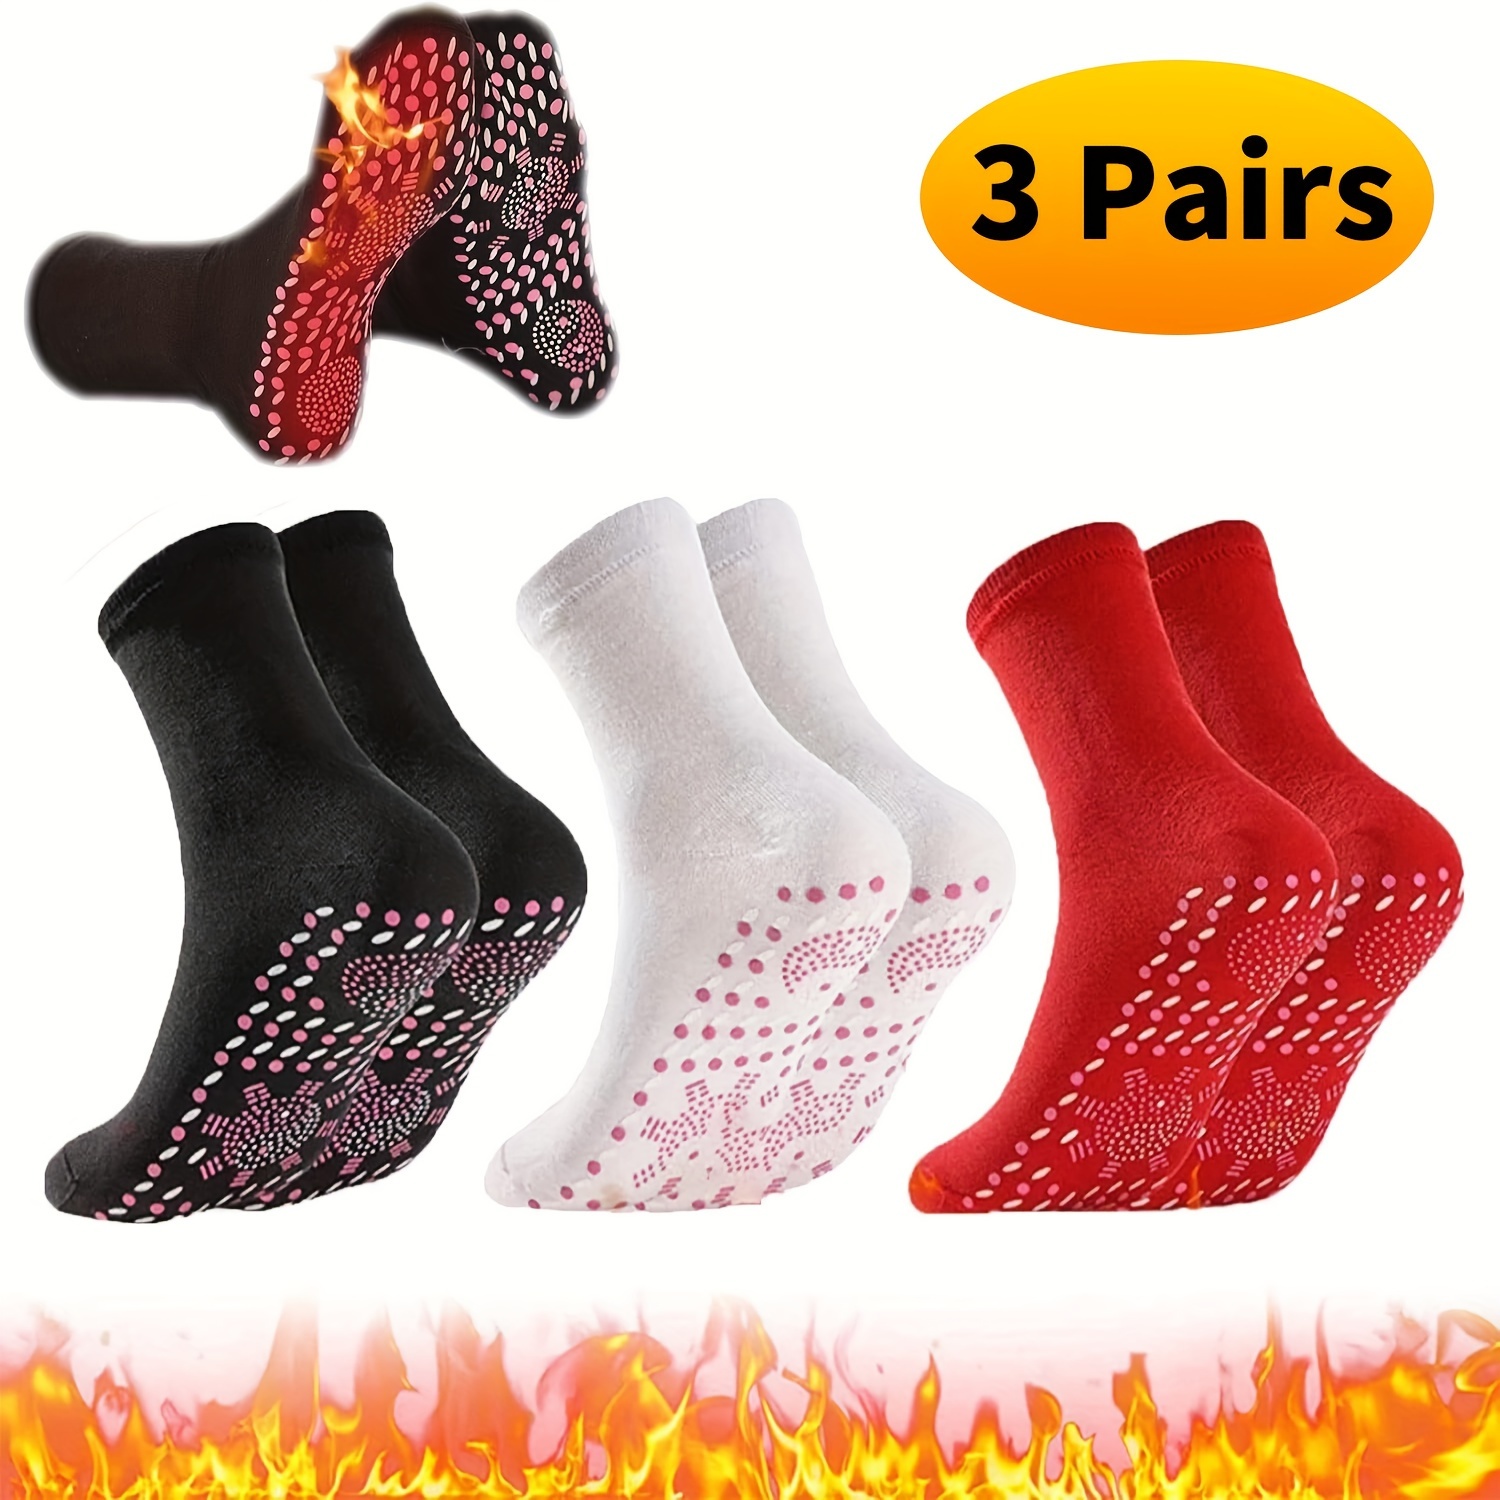 Stay Warm in Style: 12-Pack of Men's Thermal Socks, Cozy & Comfortable, Sizes 6-11, Perfect for Chilly Days - School Wear United